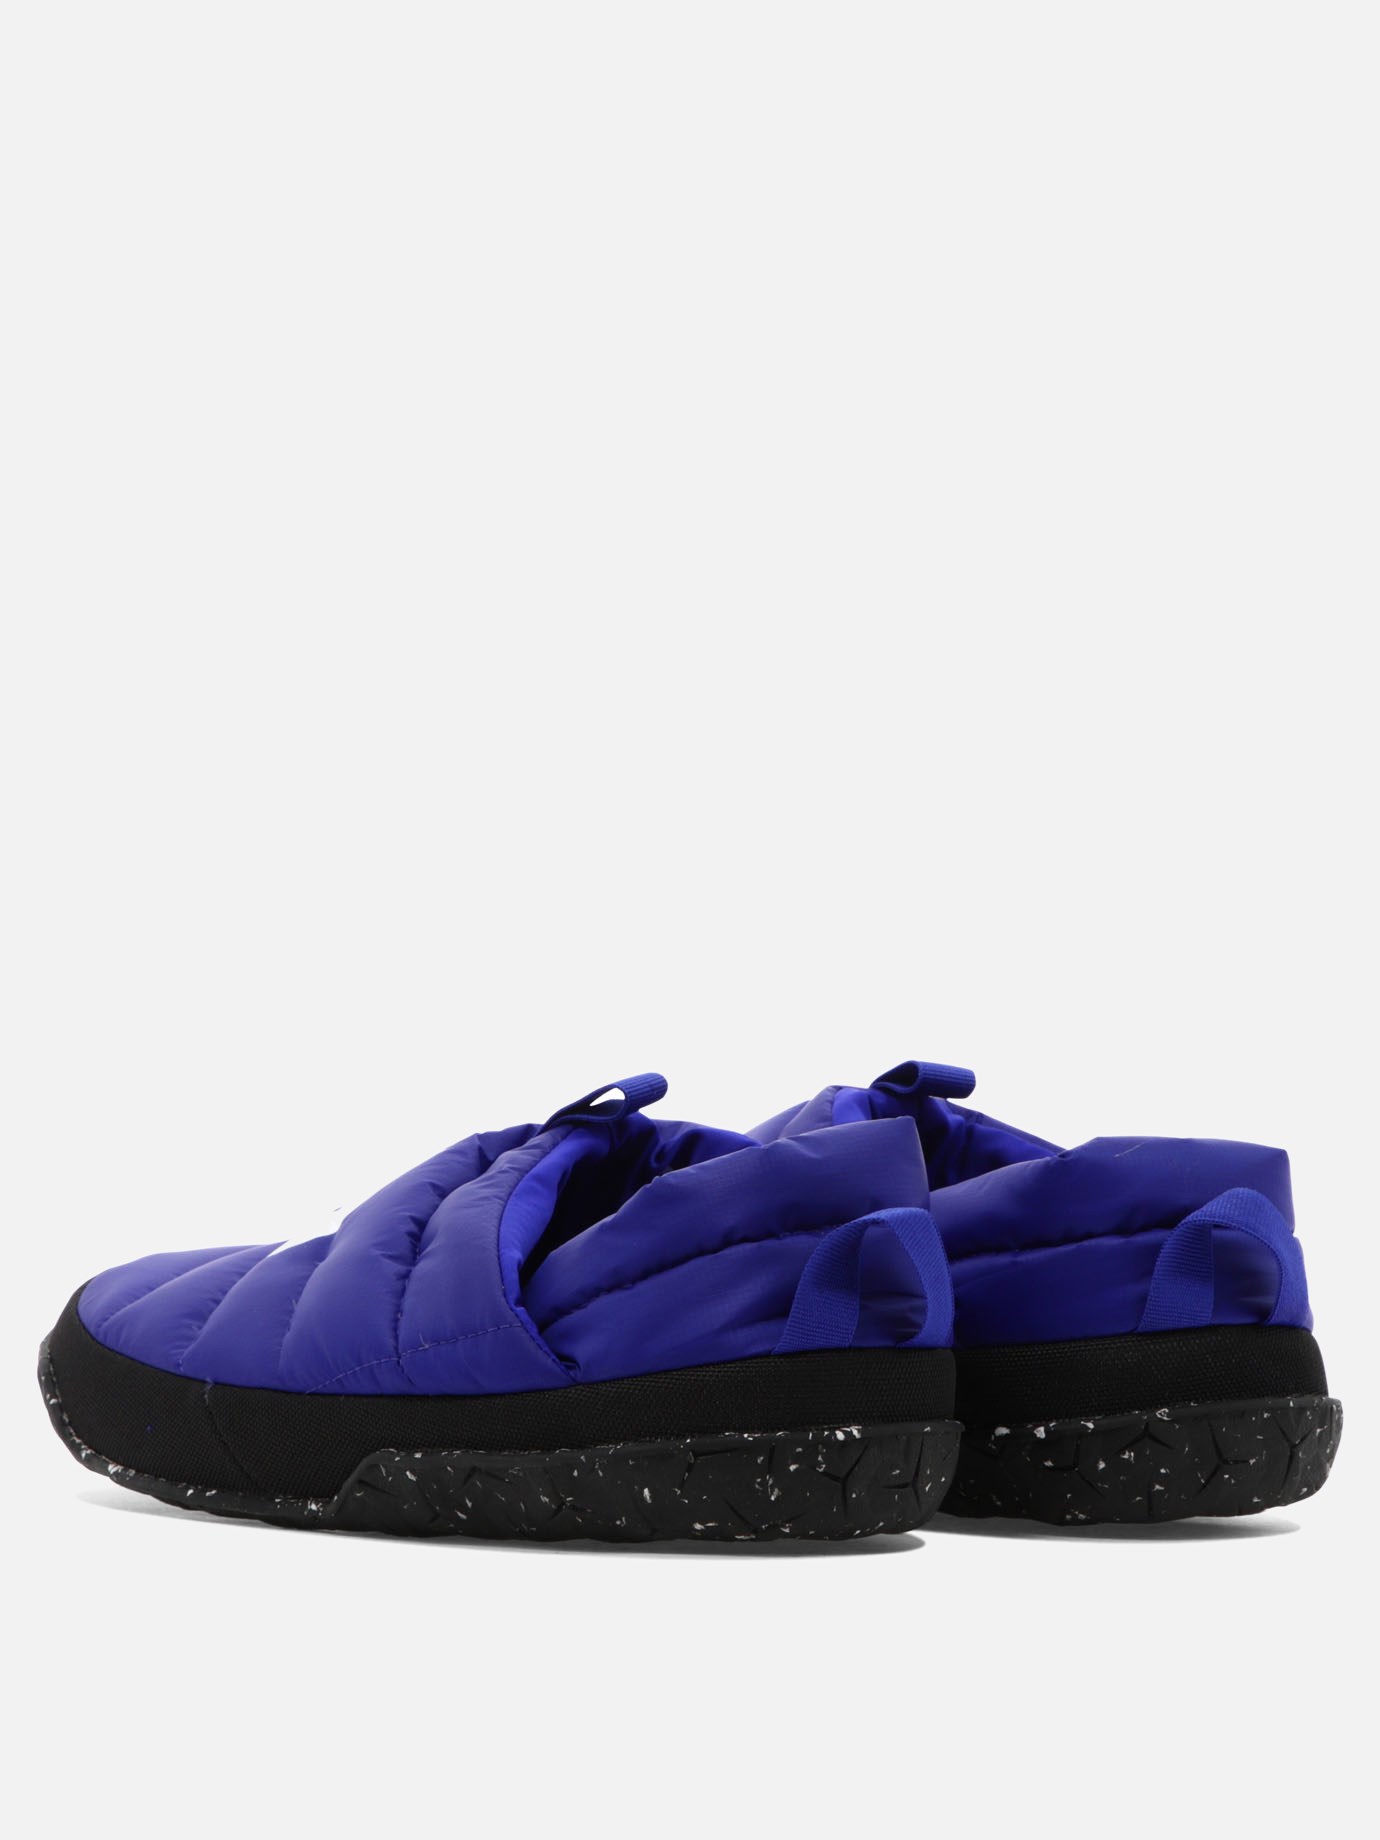 Pantofole  Nuptse  by The North Face